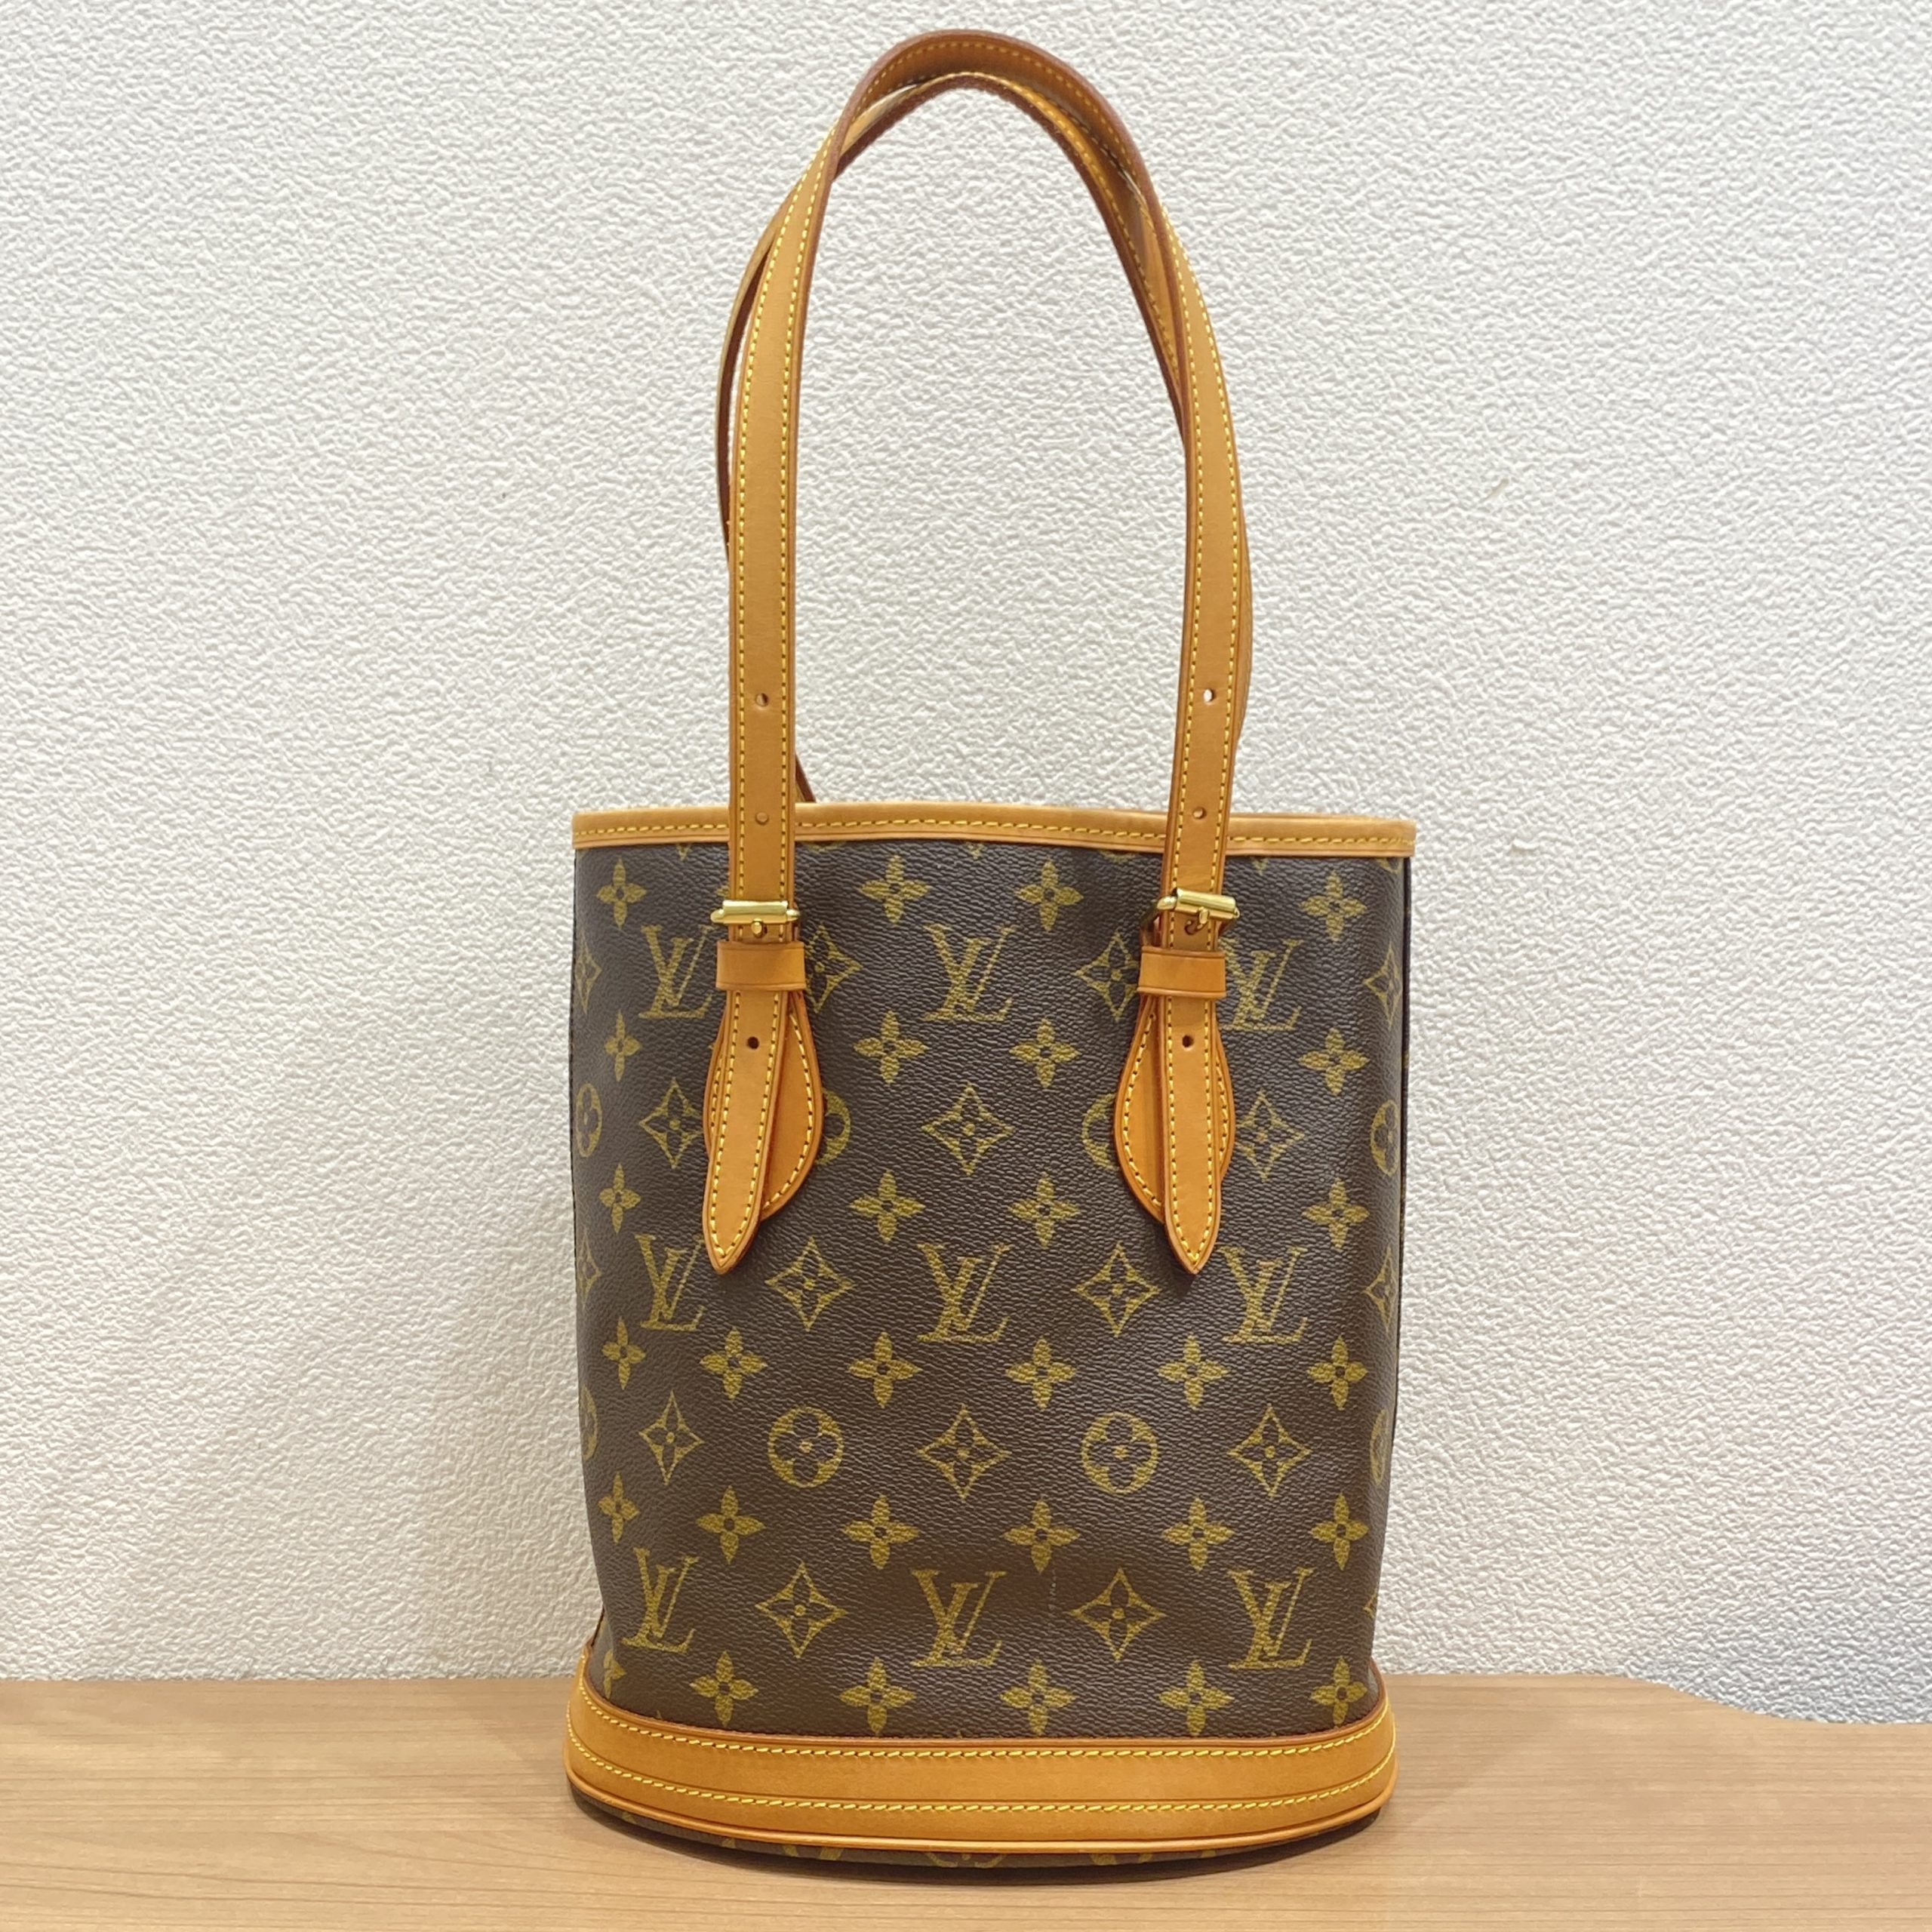 【LOUIS VUITTON/ルイヴィトン】モノグラム バケットPM M42238